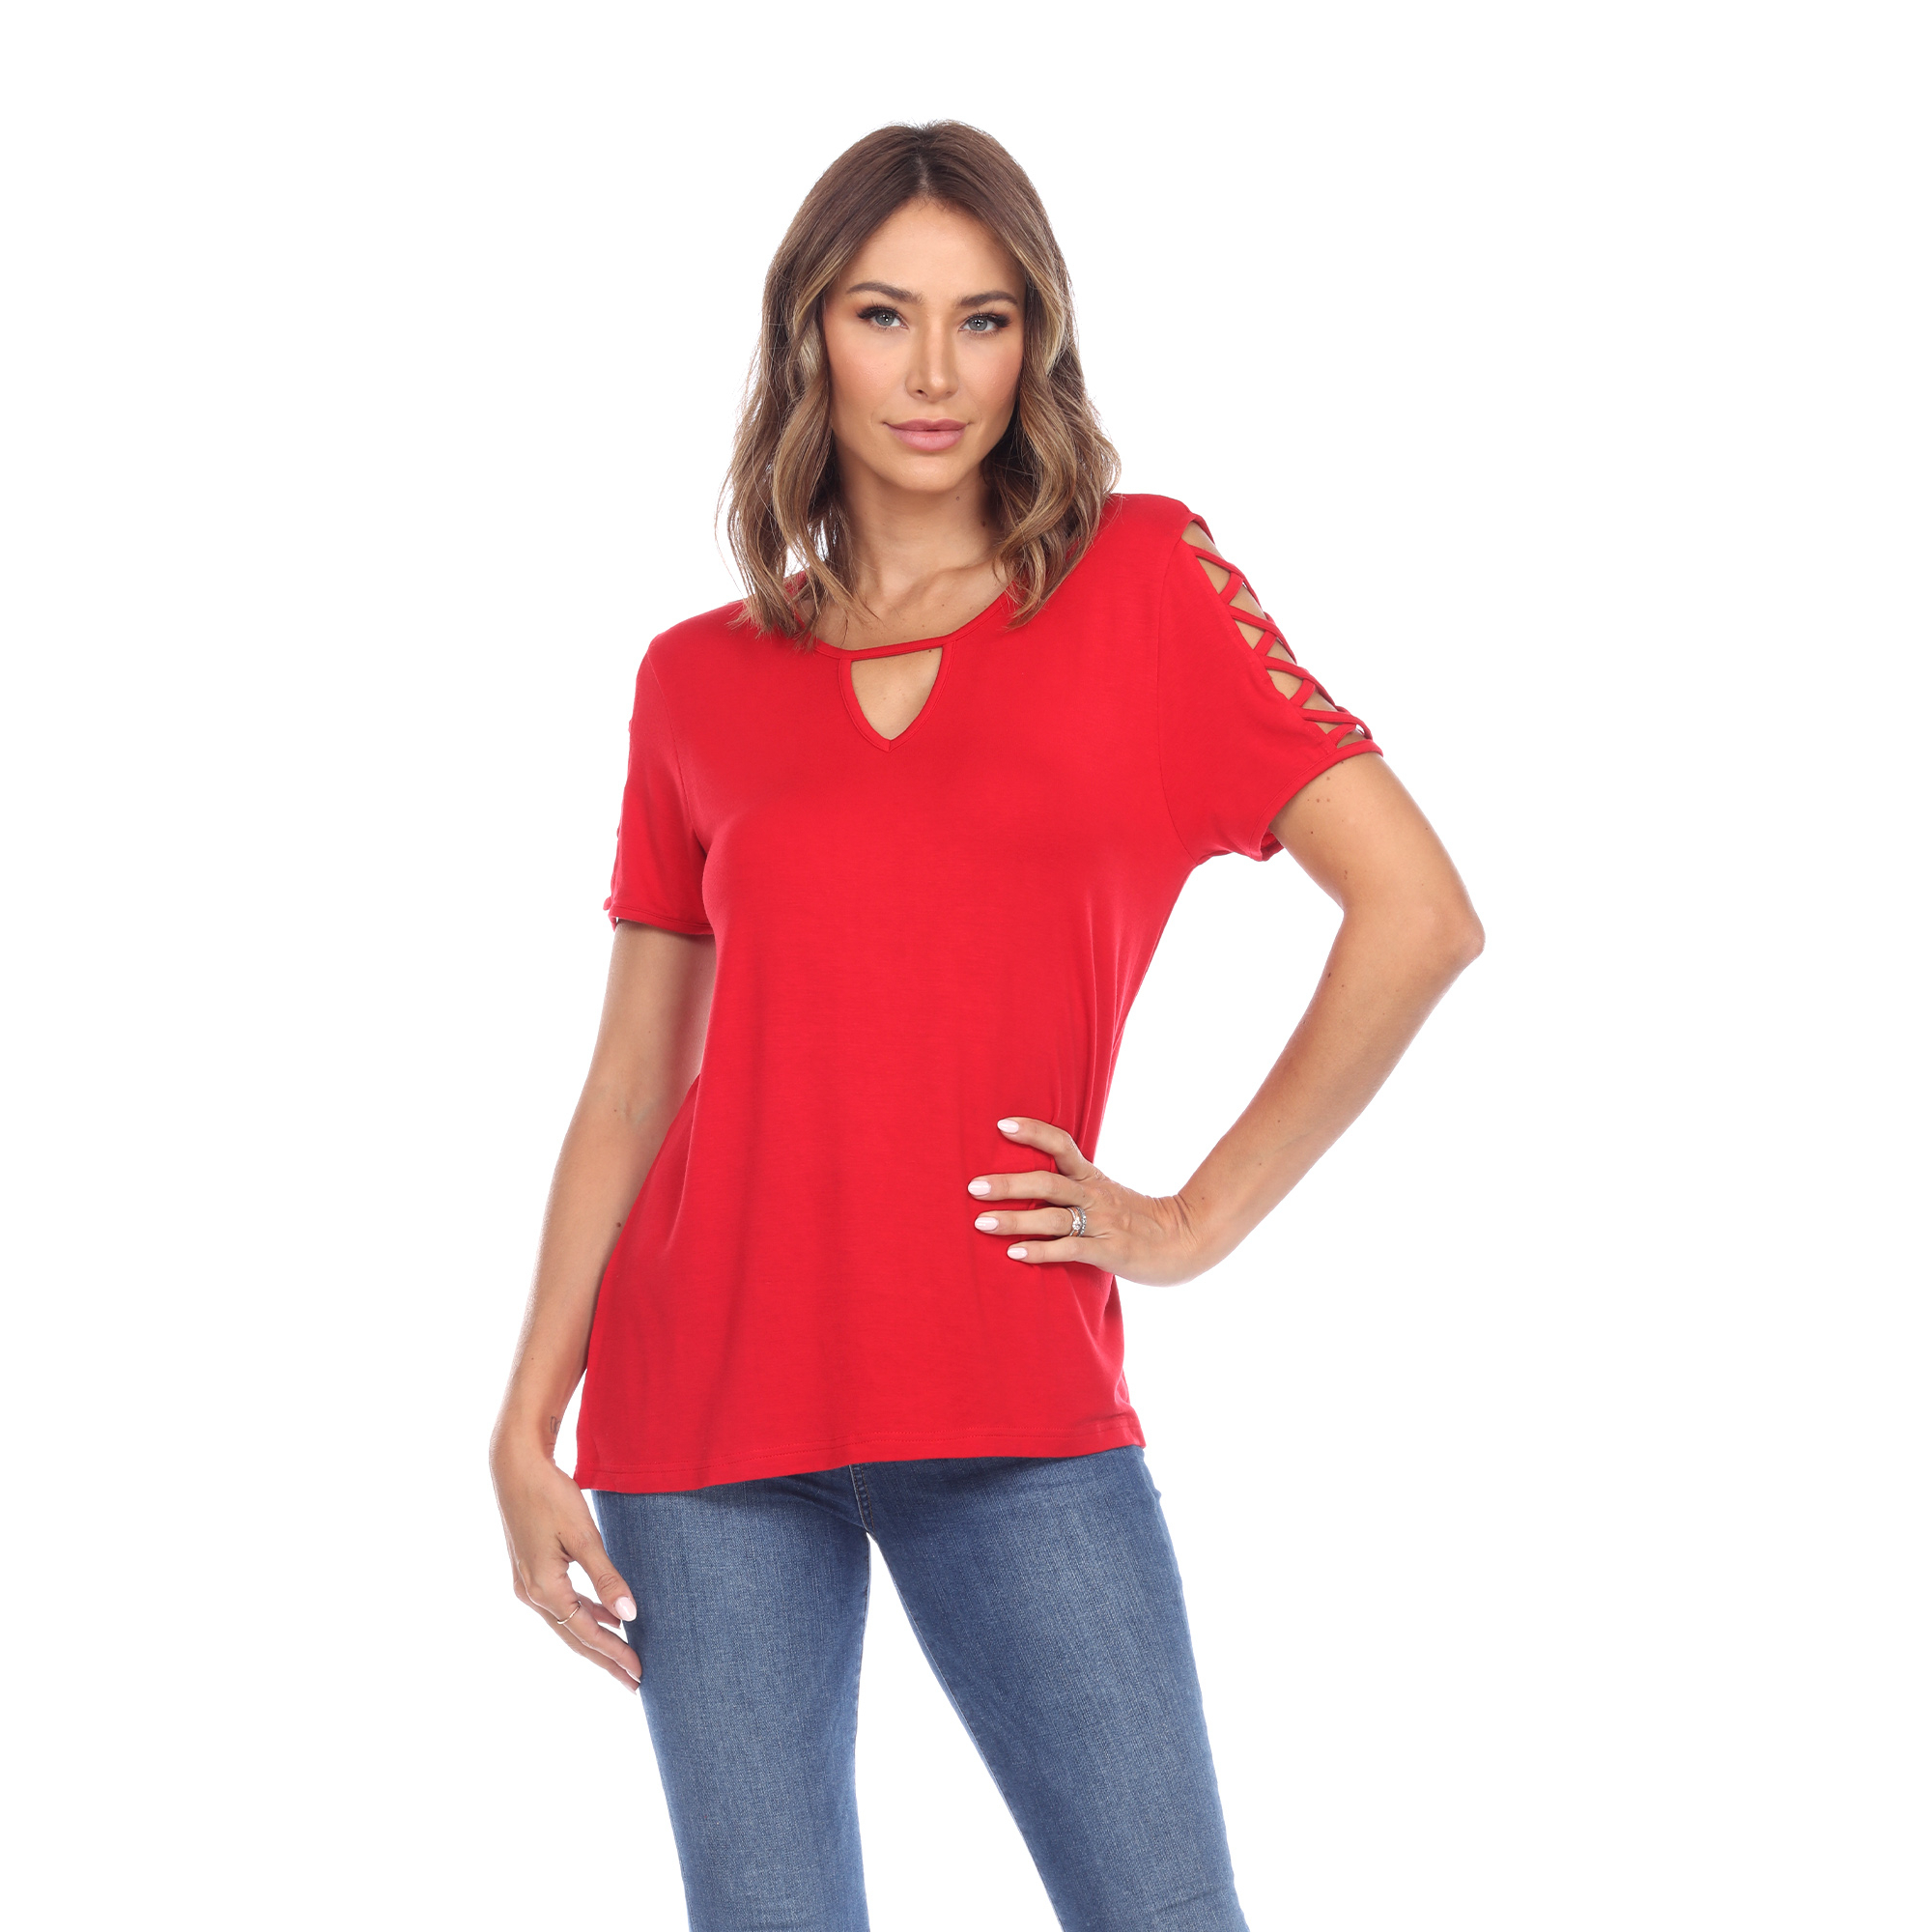 White Mark Women's Keyhole Neck Cutout Short Sleeve Top - Red, X-Large